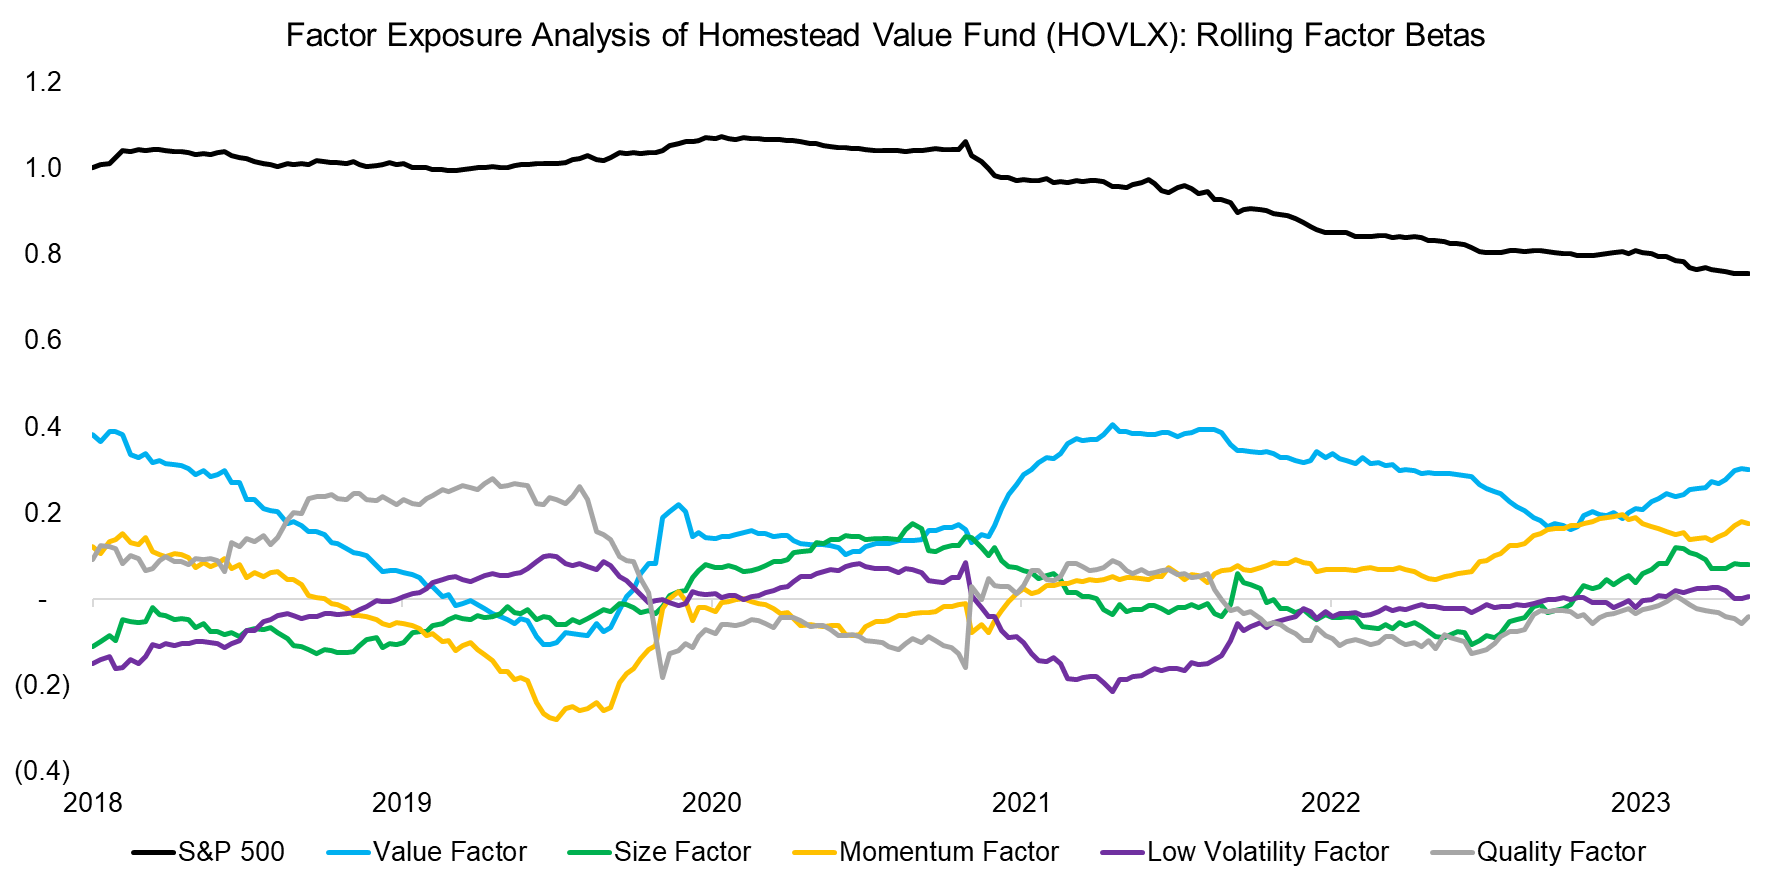 Factor Exposure Analysis of Homestead Value Fund (HOVLX) Rolling Factor Betas